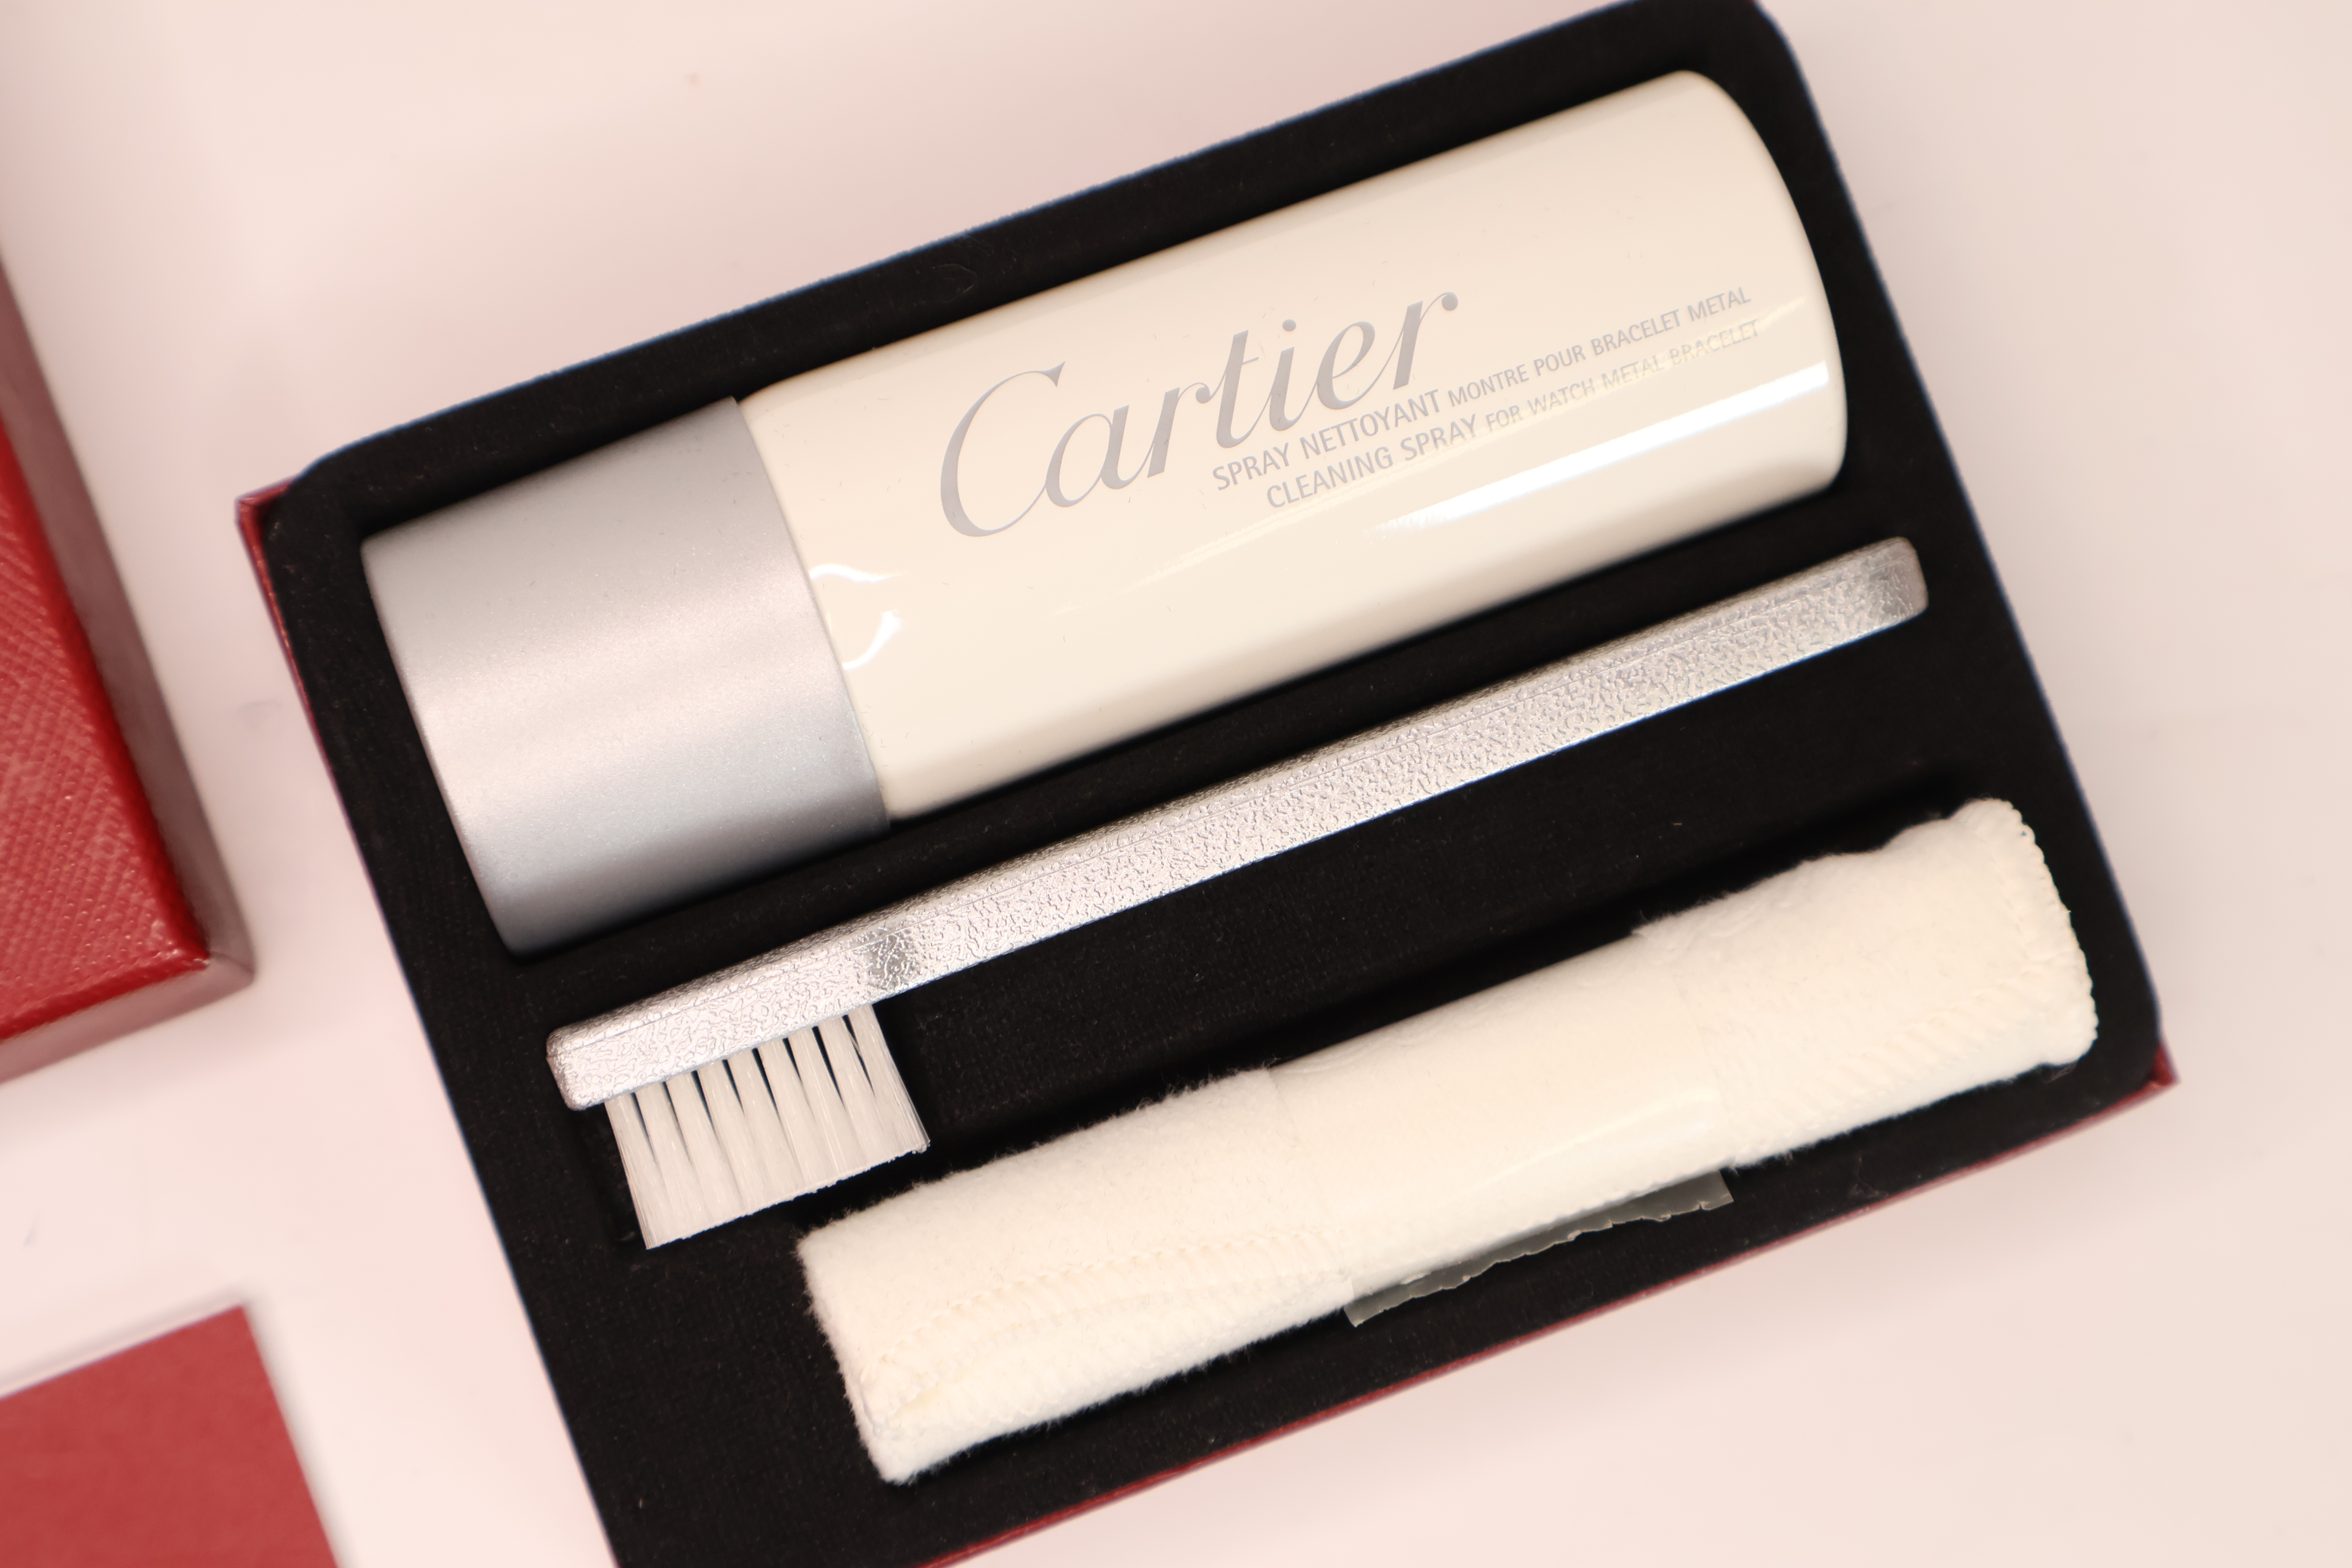 *To Be Sold Without Reserve* Cartier Cleaning Kit - Image 2 of 2